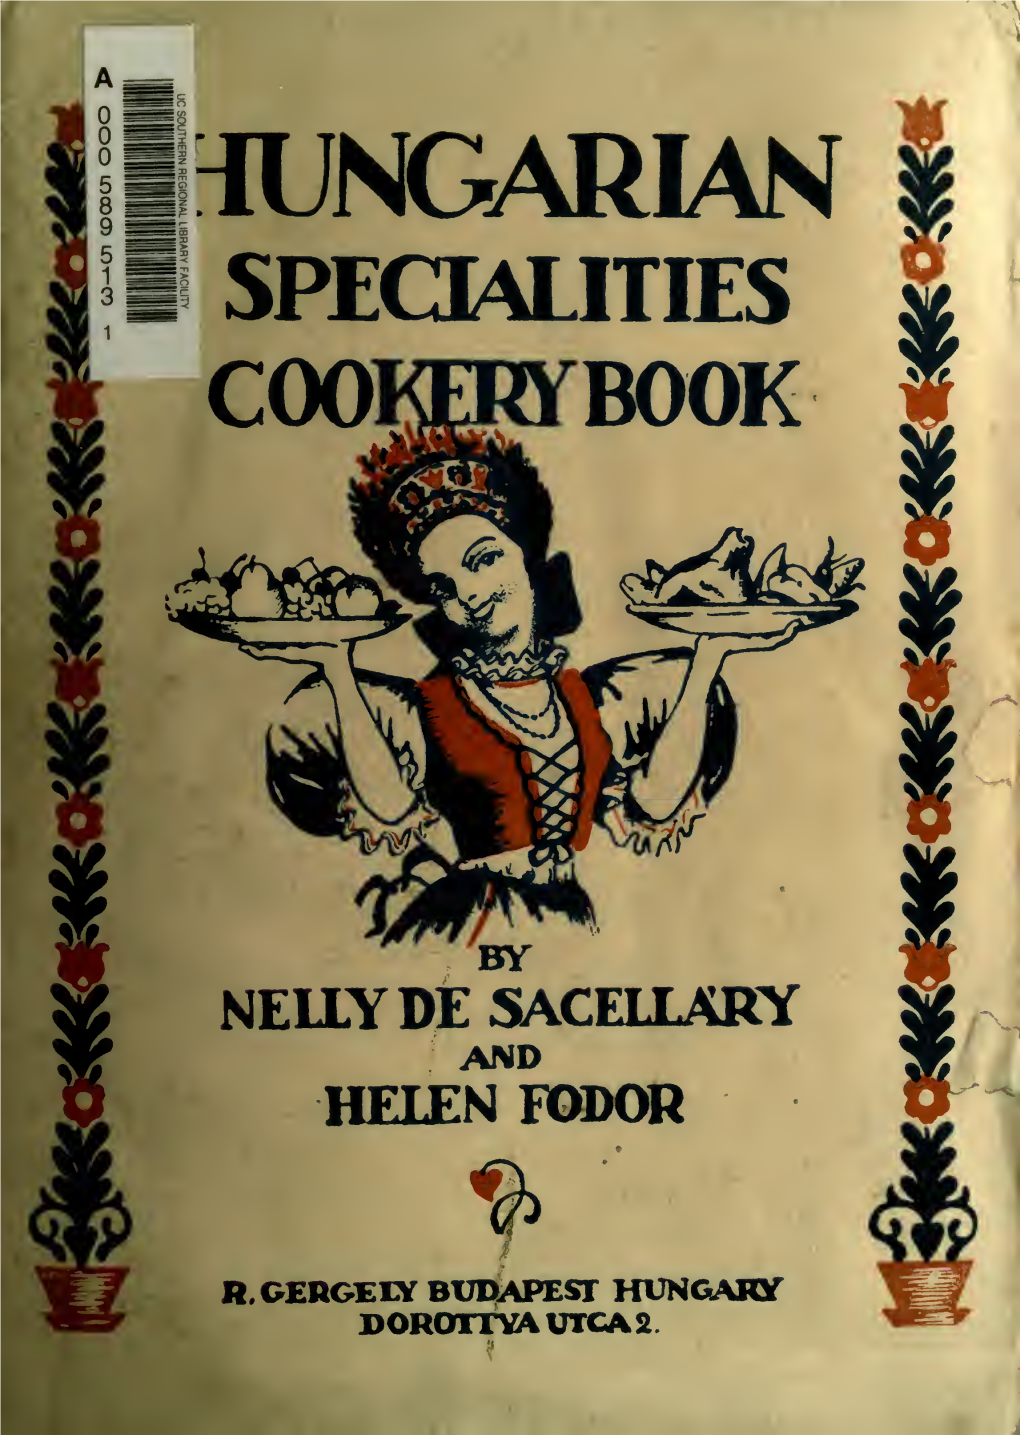 Hungarian Specialities Cookery Book